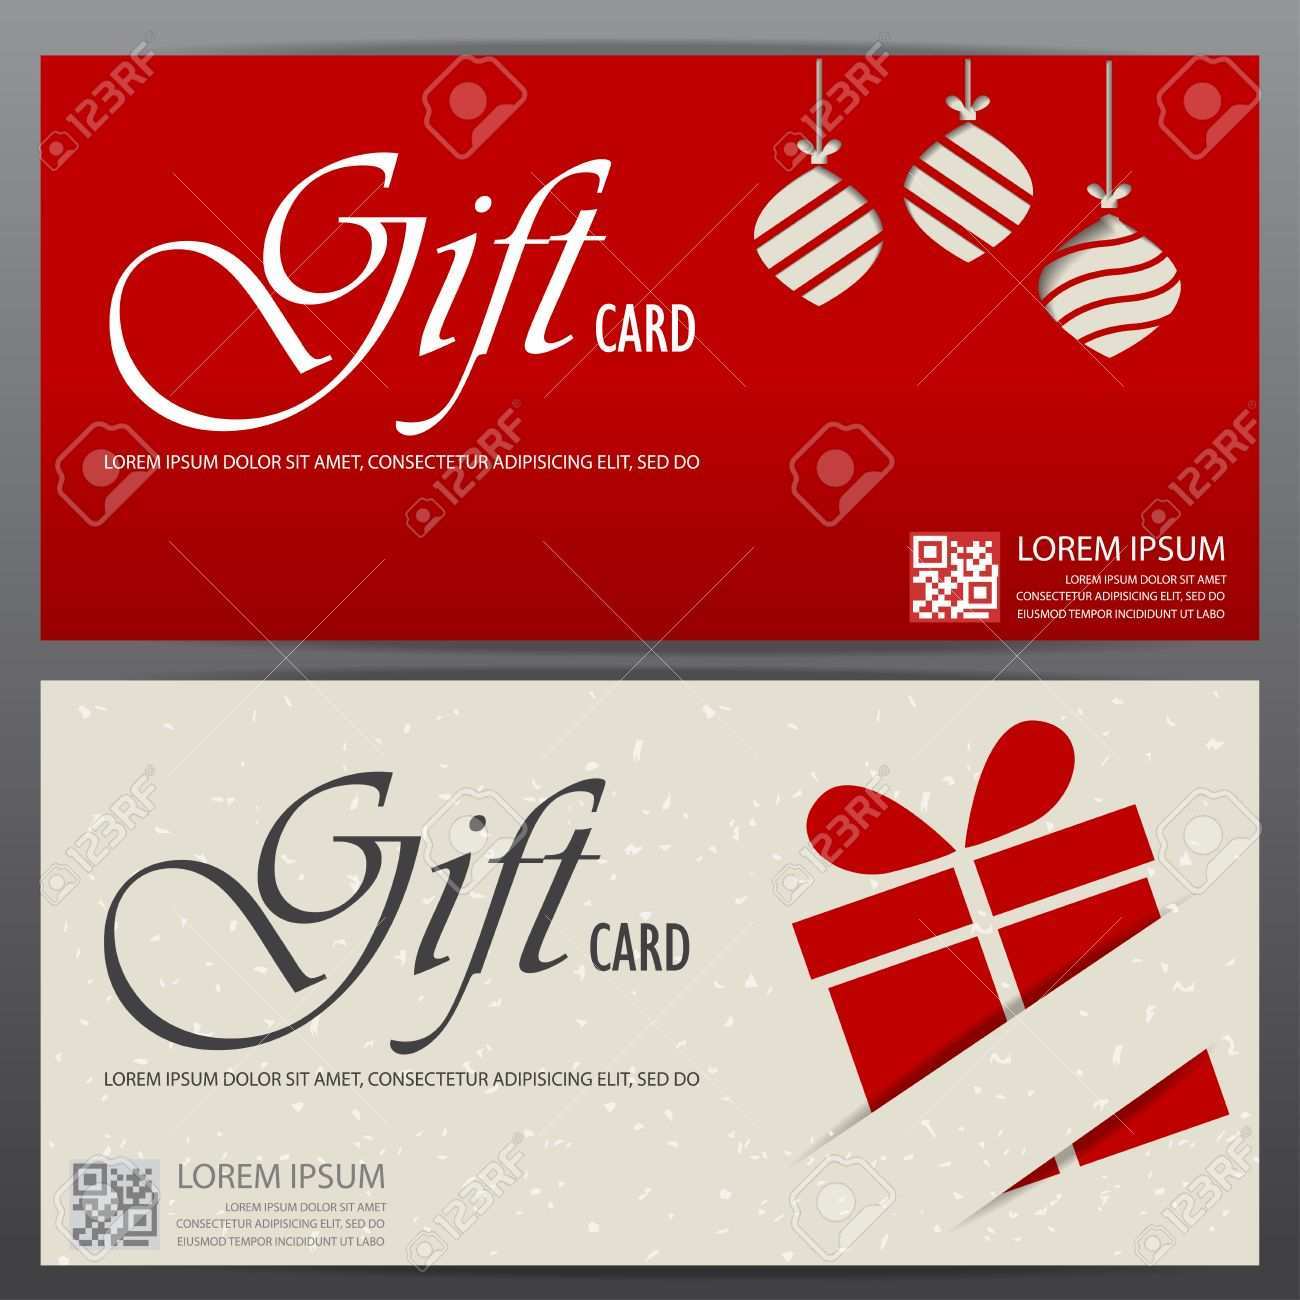 12 Printable Shopping Card Template Free Download by Shopping Card Template Free